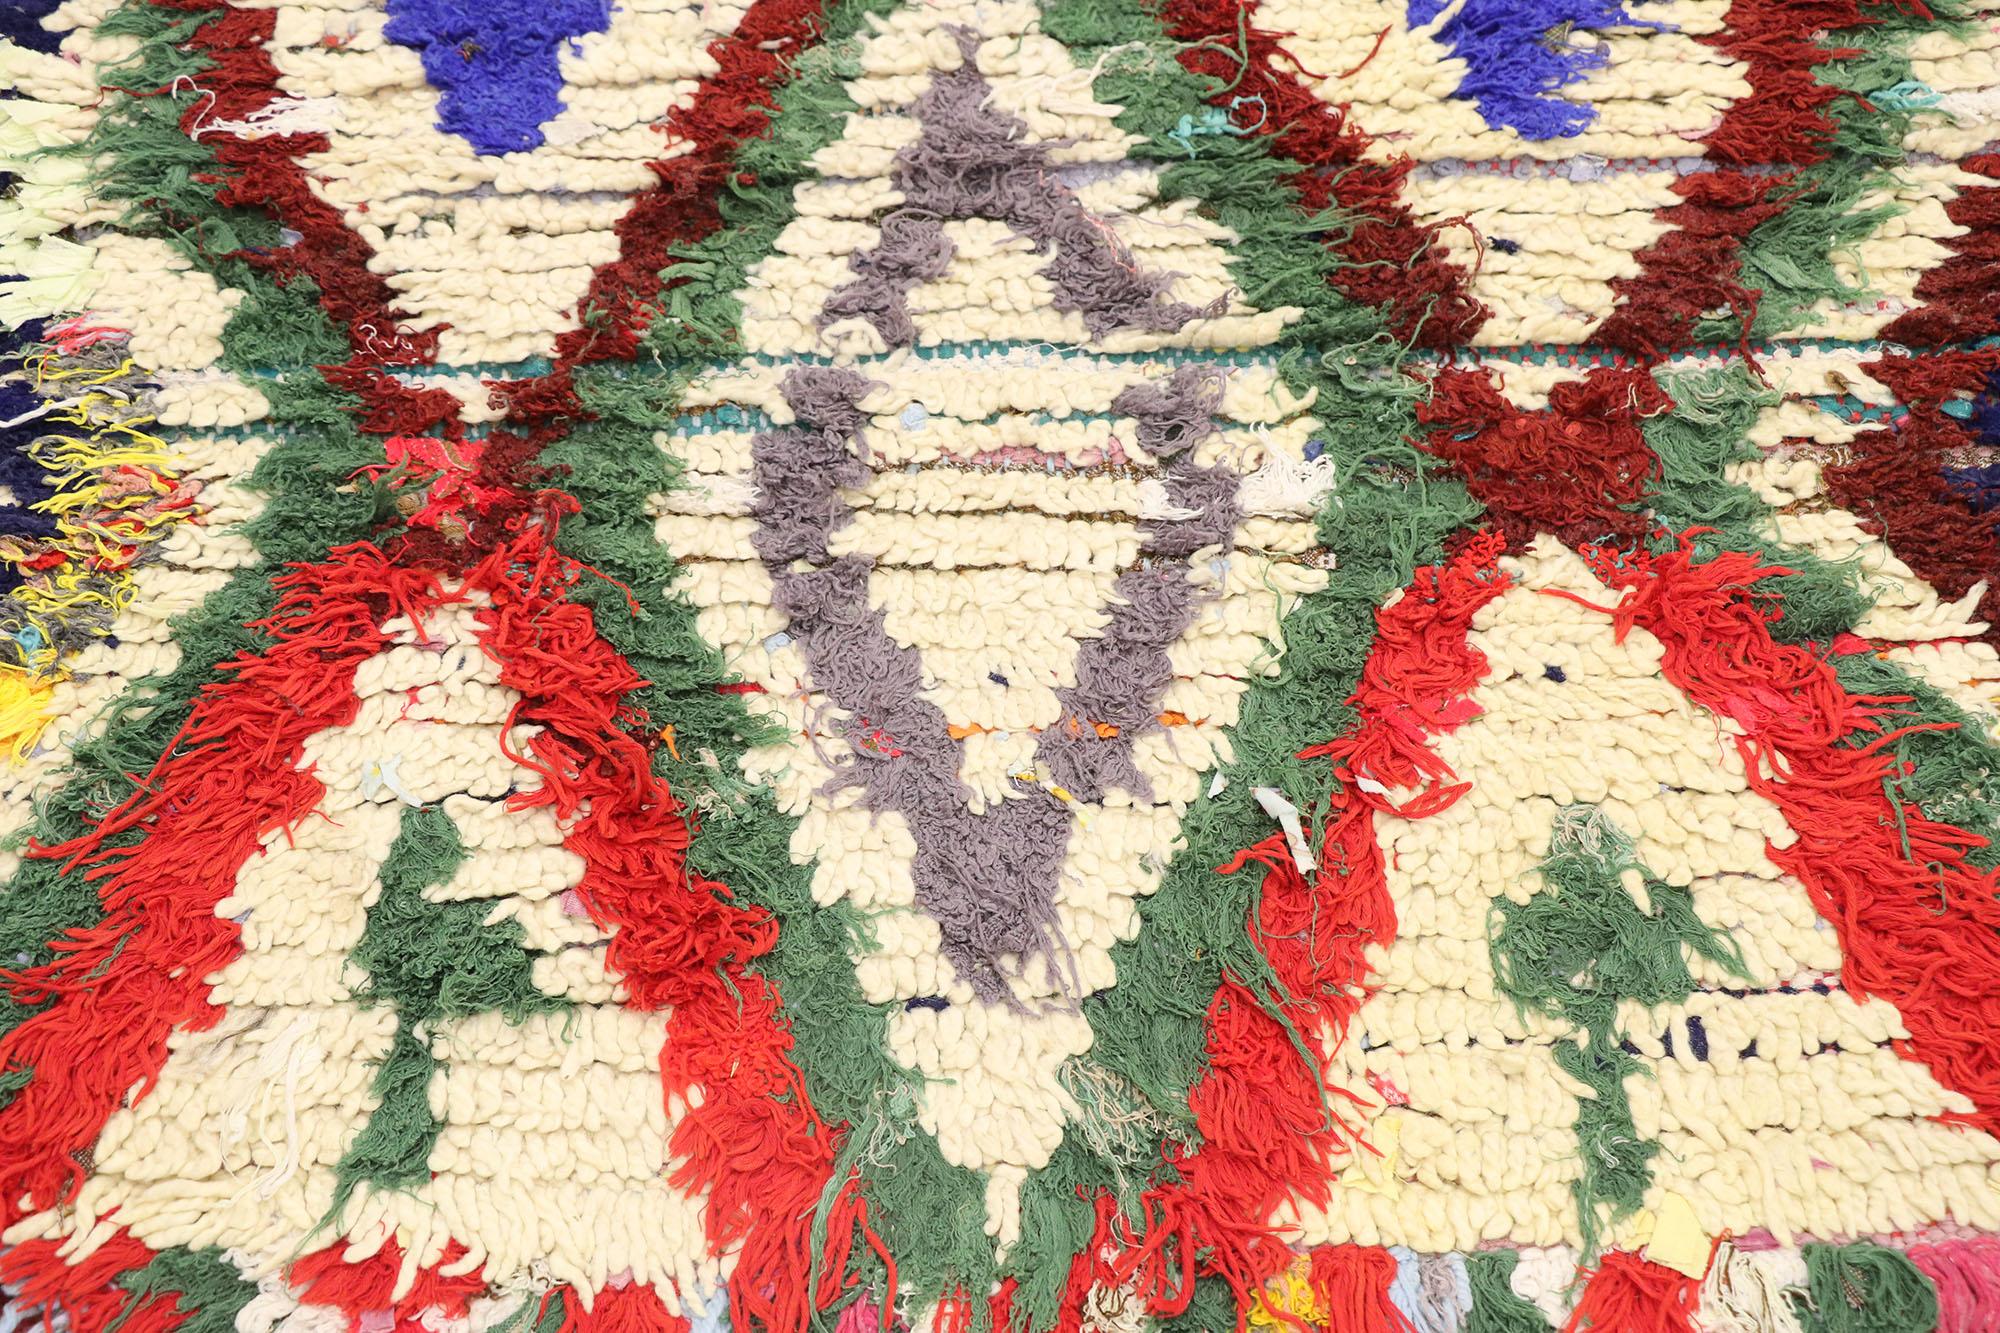 Vintage Berber Boucherouite Moroccan Rug with Bohemian Tribal Style In Good Condition For Sale In Dallas, TX